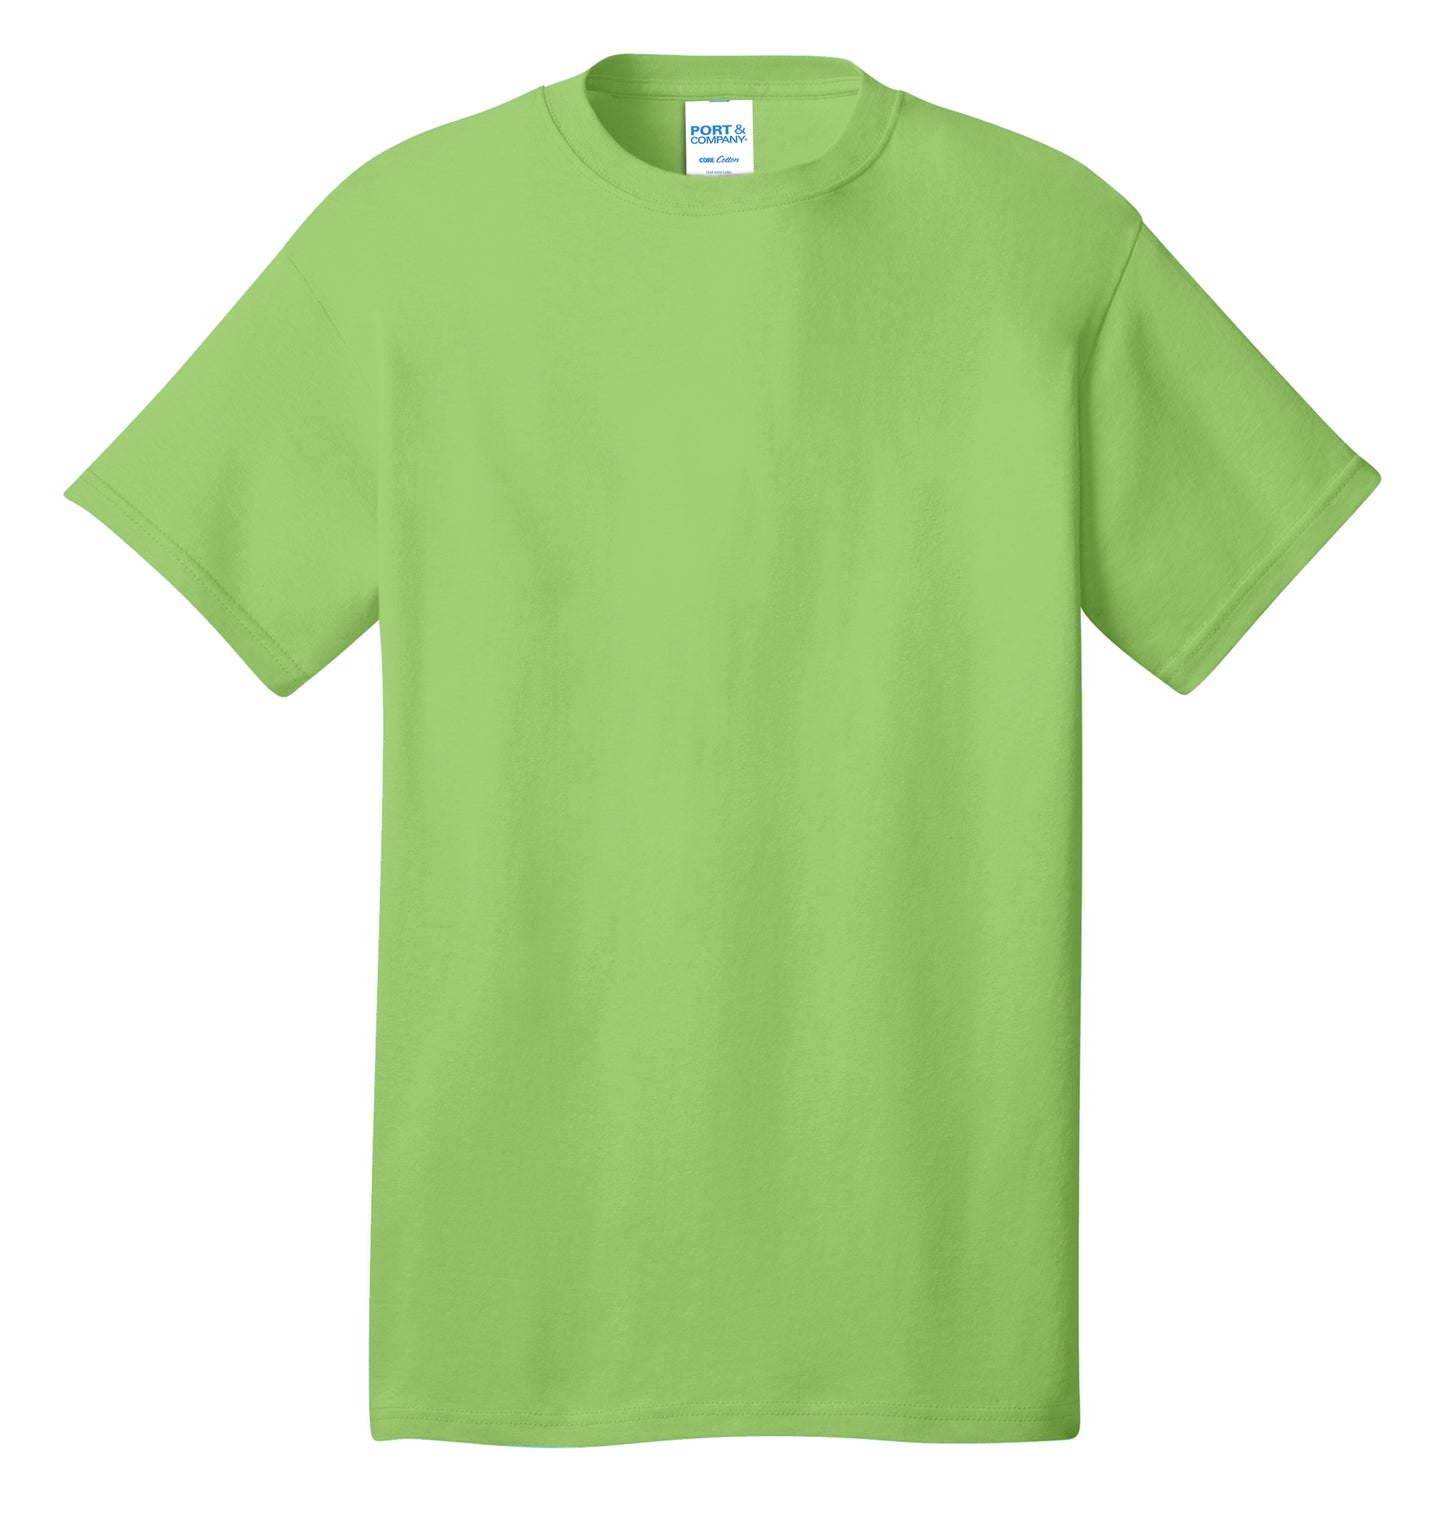 BLACK FRIDAY EXTRAVAGANZA- 50 CUSTOM SHIRTS ONE COLOR DESIGN FOR JUST $4.95 EACH!